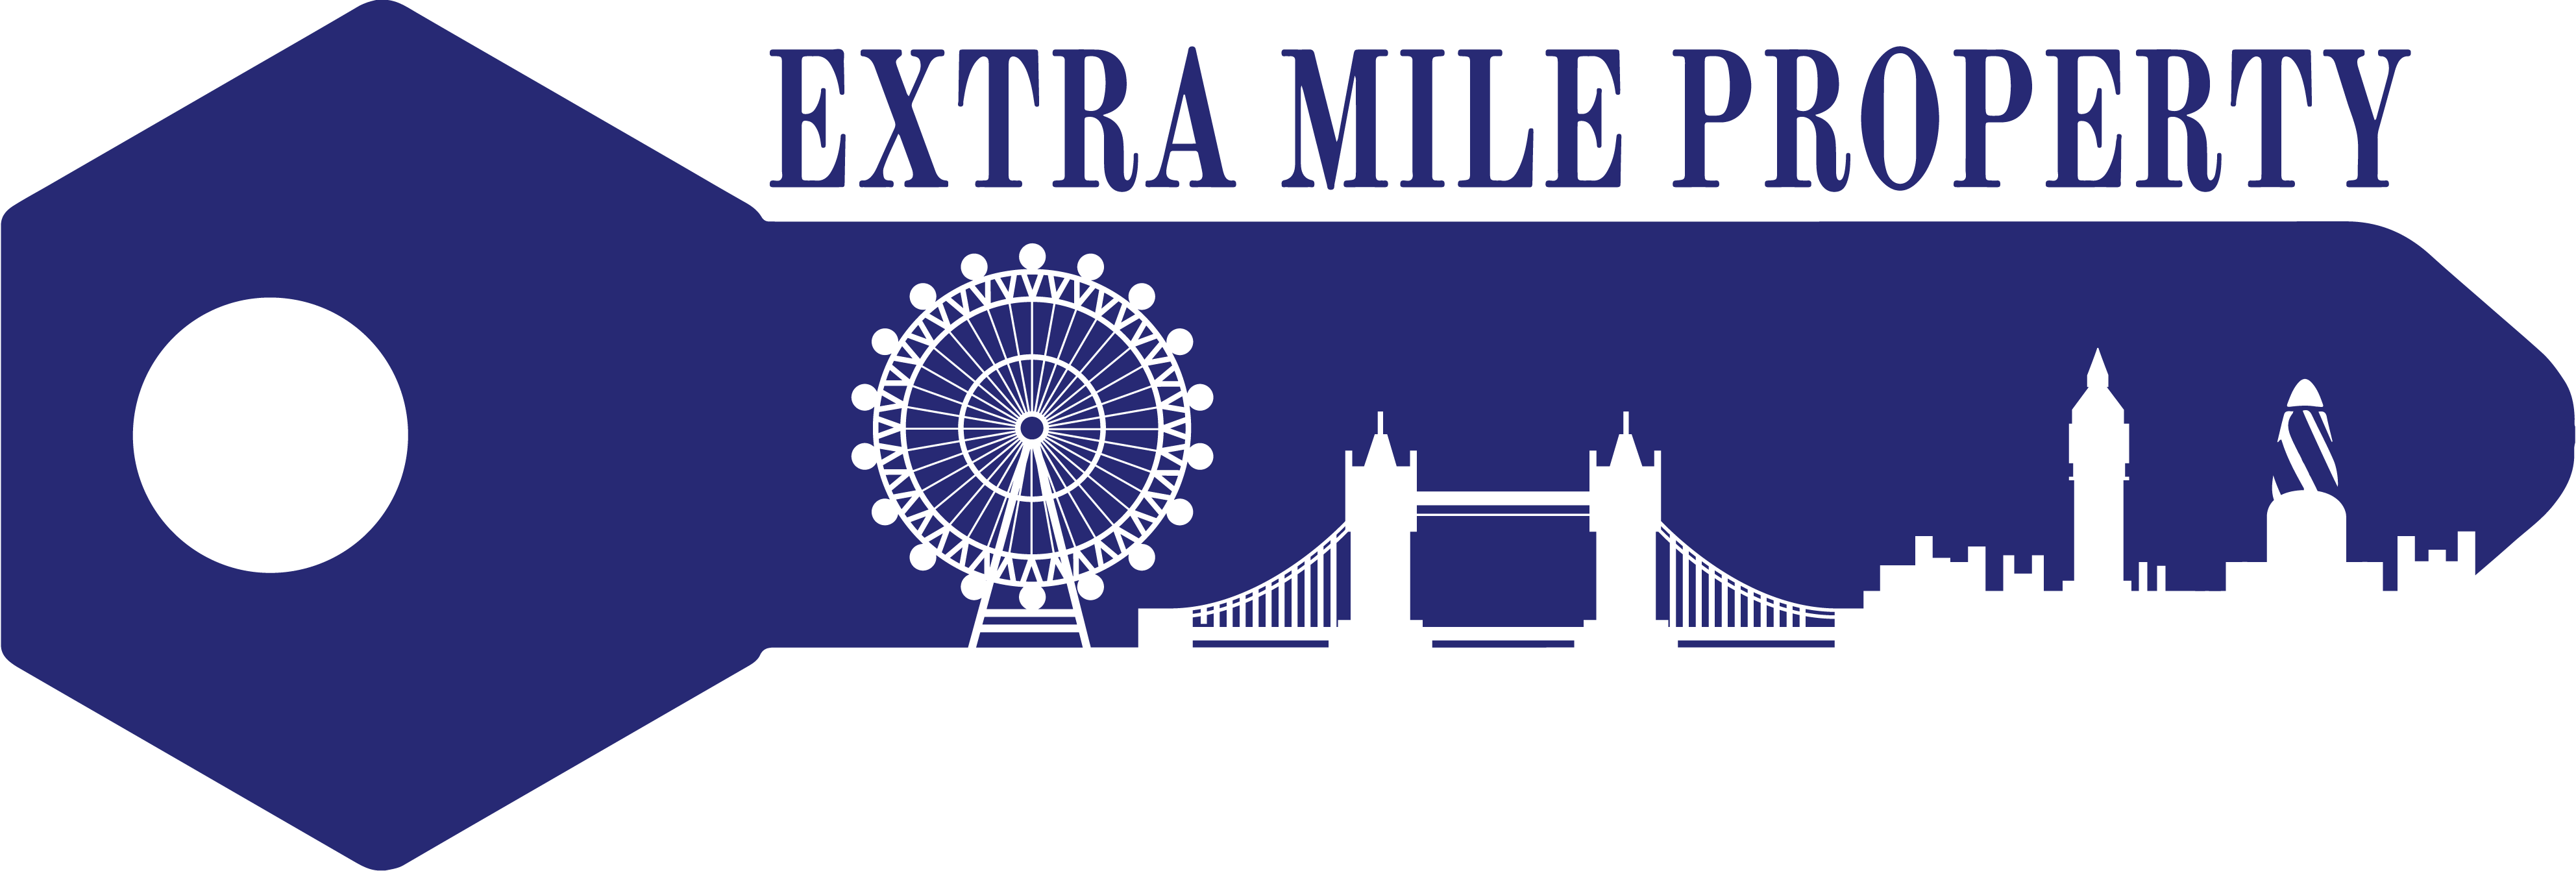 Extra Mile Property - London : Letting agents in London Greater London City Of London